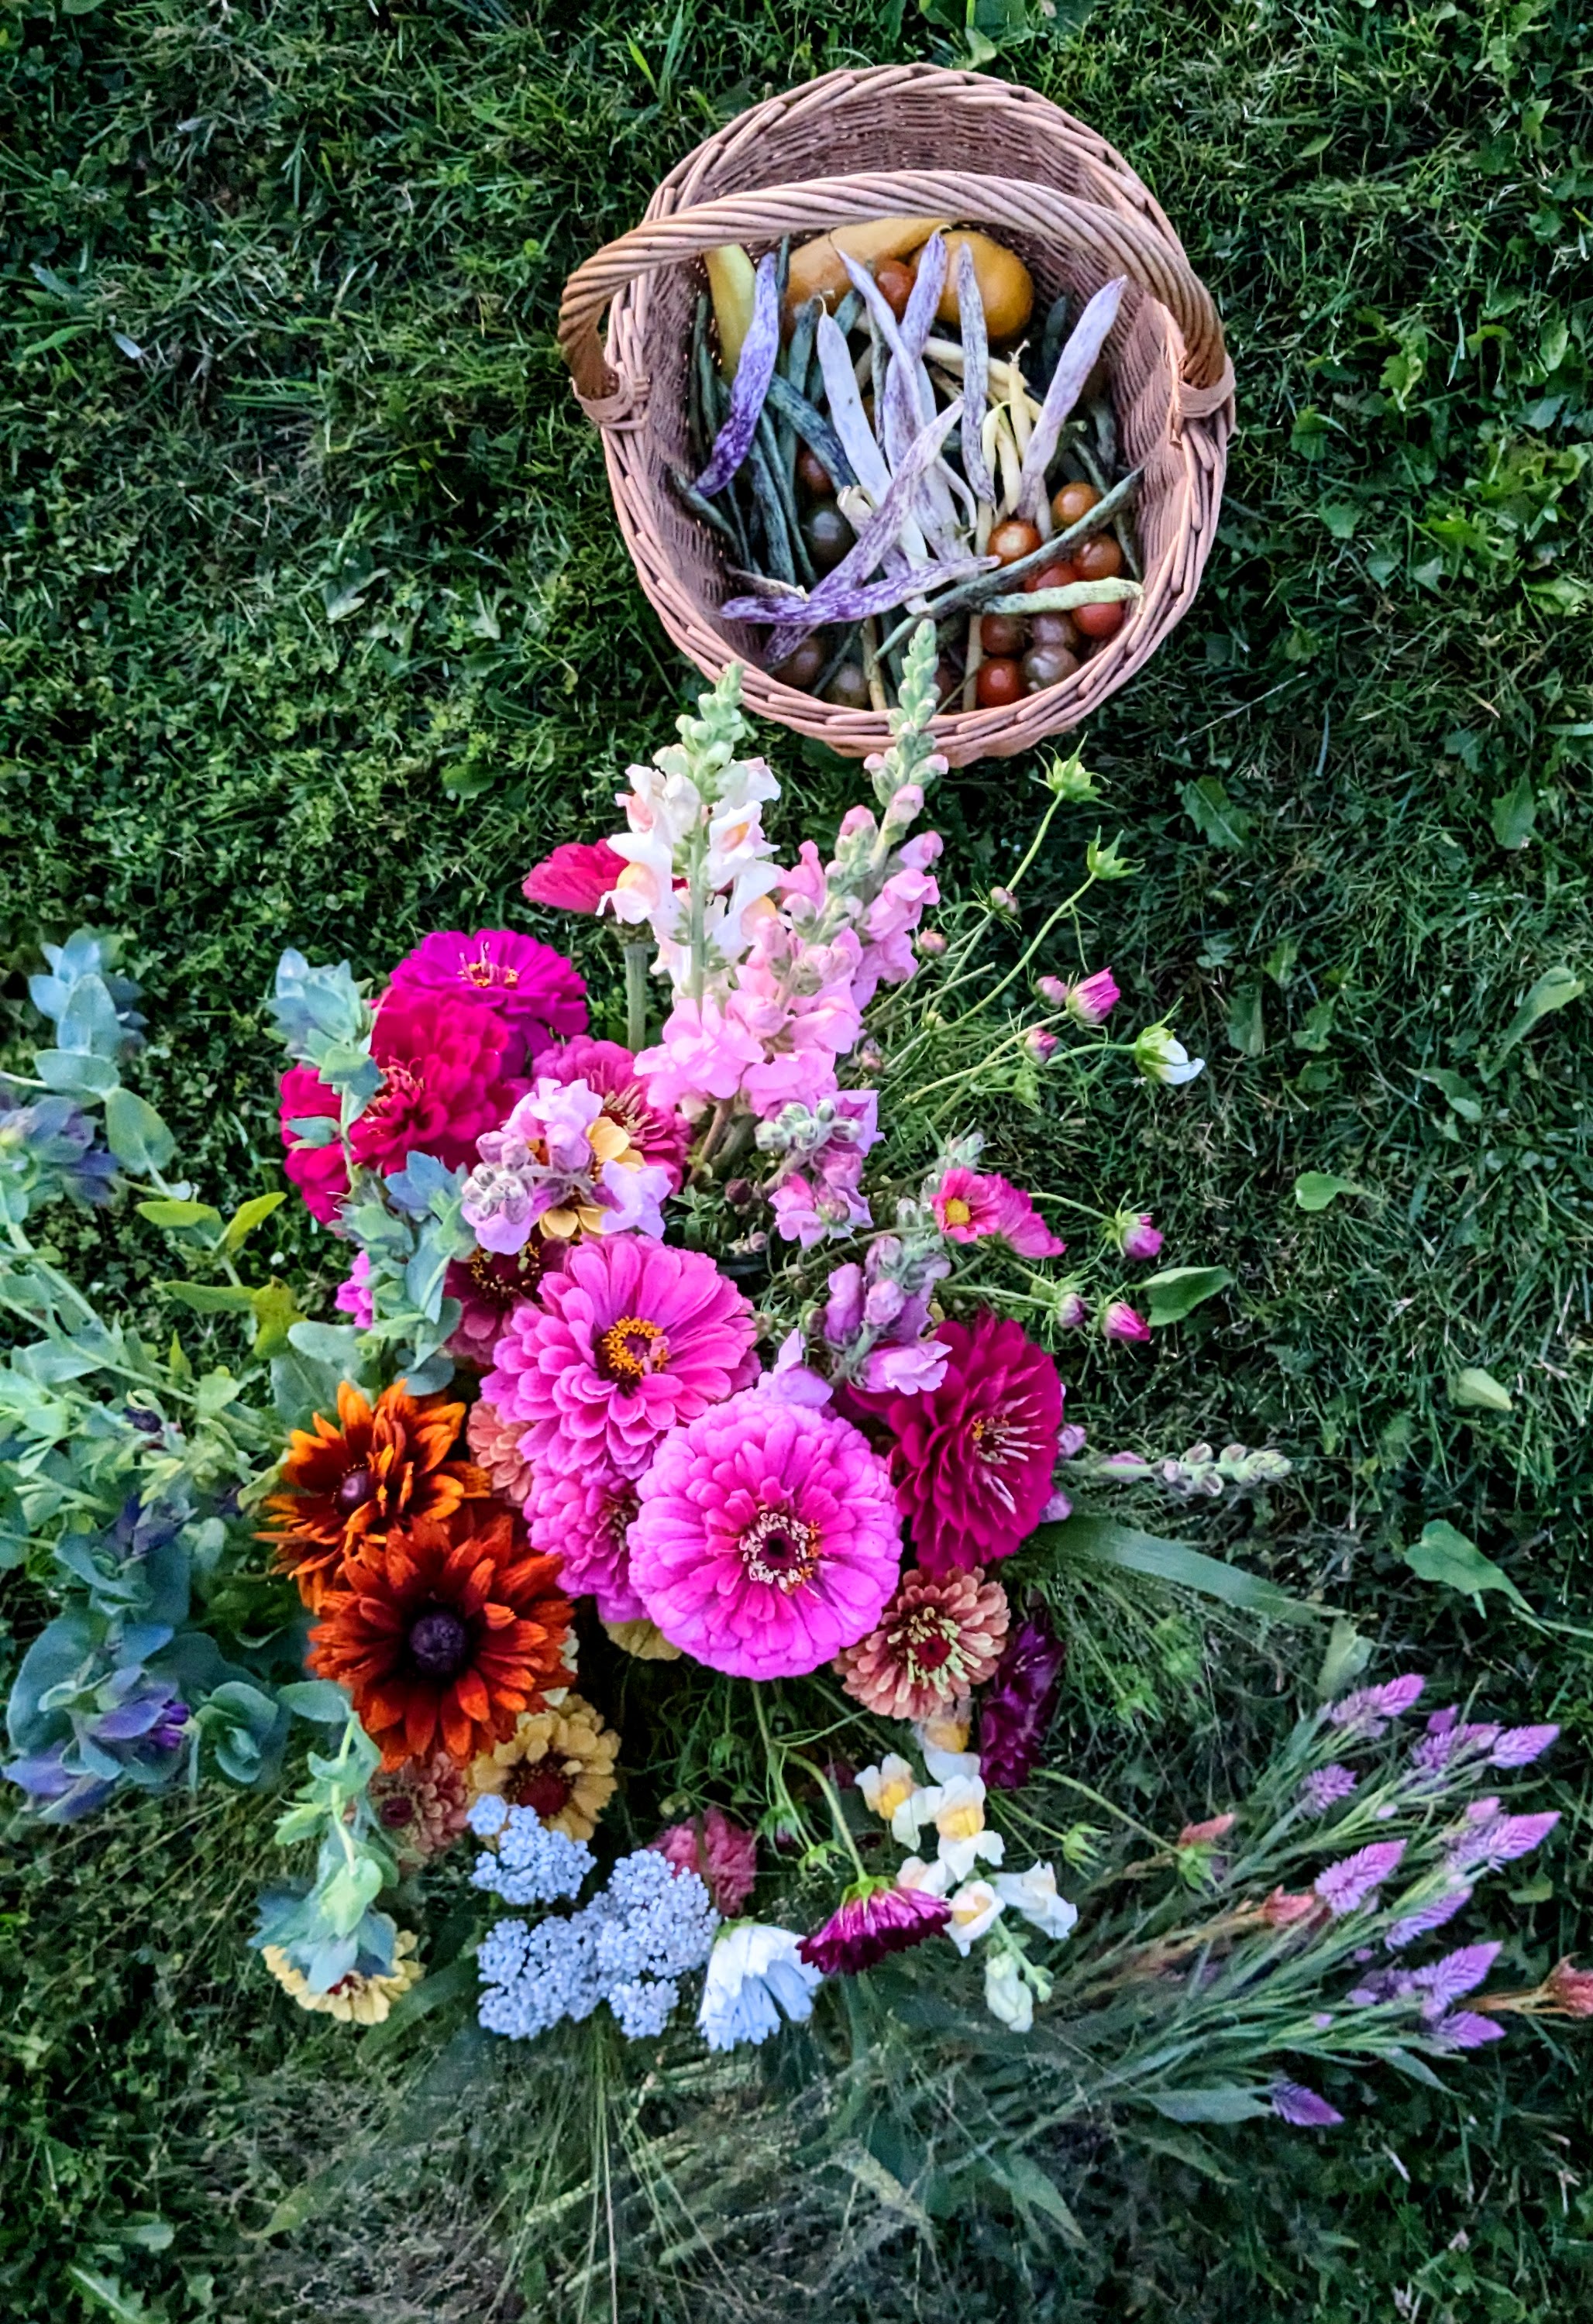 Bucket of flowers and basket of beans and tomatoes.